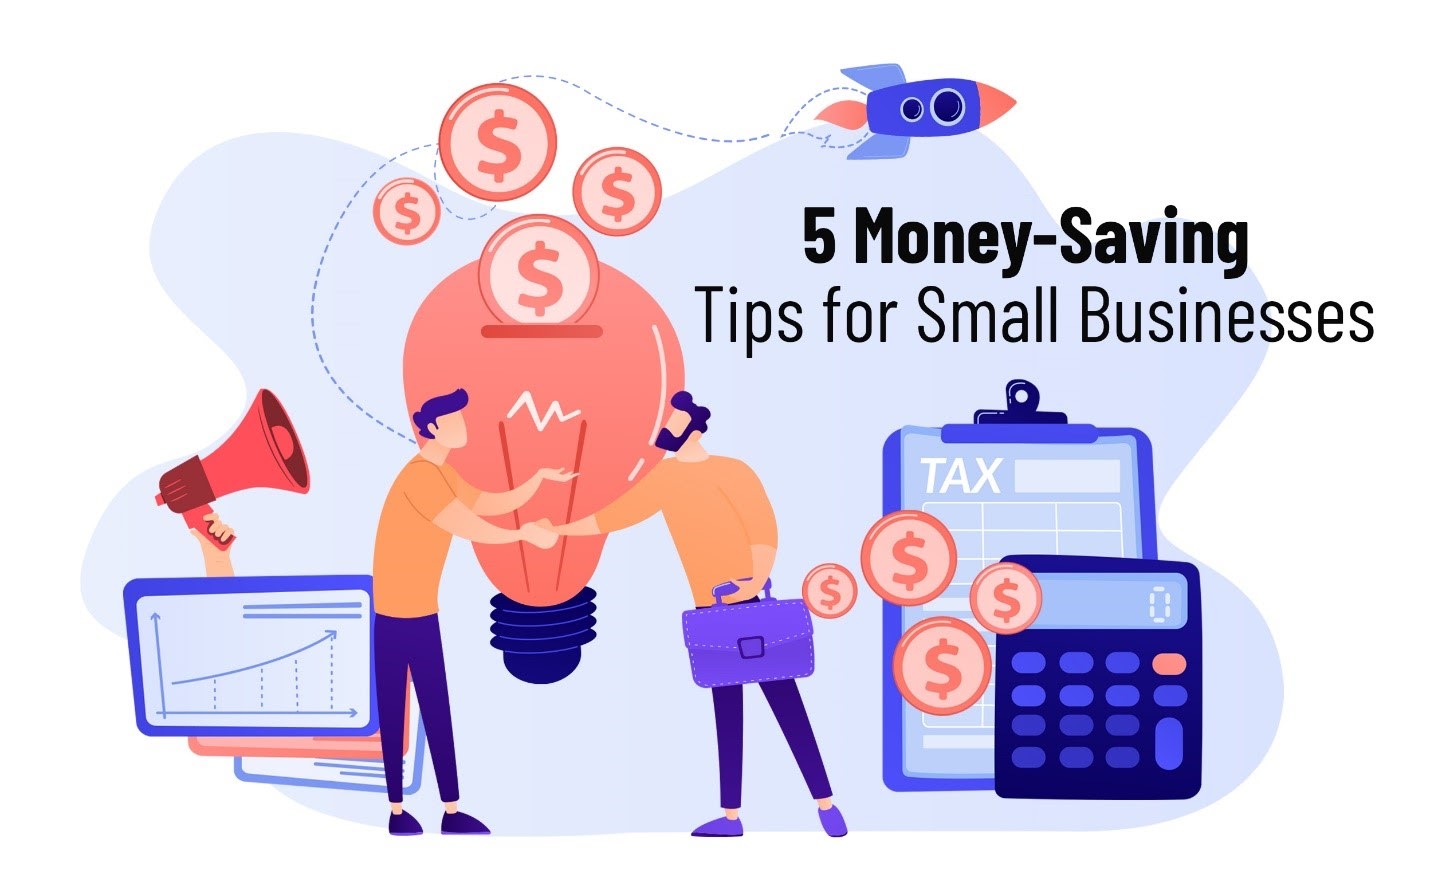 5 Money-Saving Tips for Small Businesses